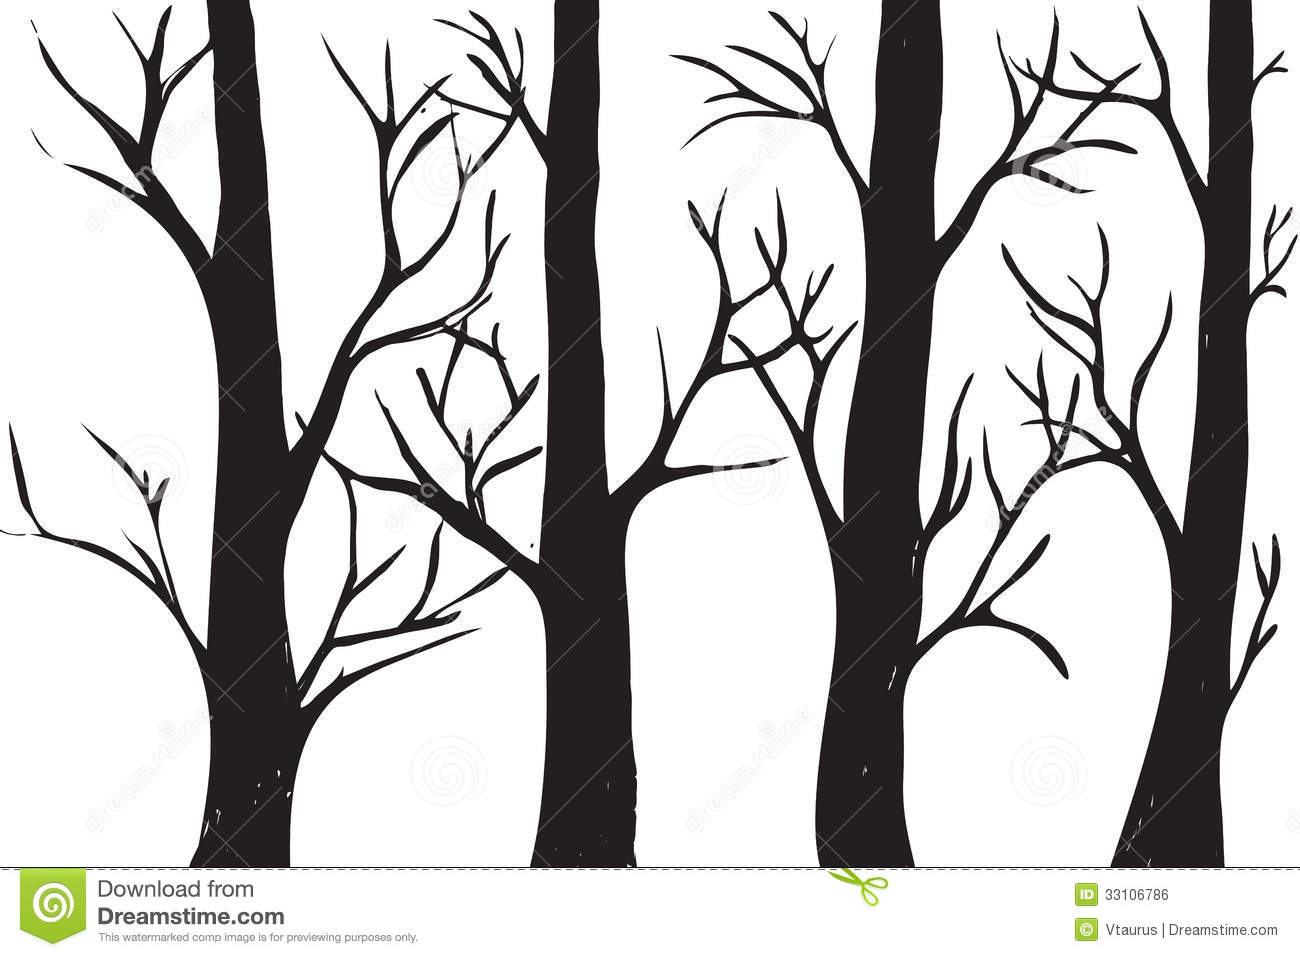 Clip Art Tree No Leaves   Clipart Panda   Free Clipart Images